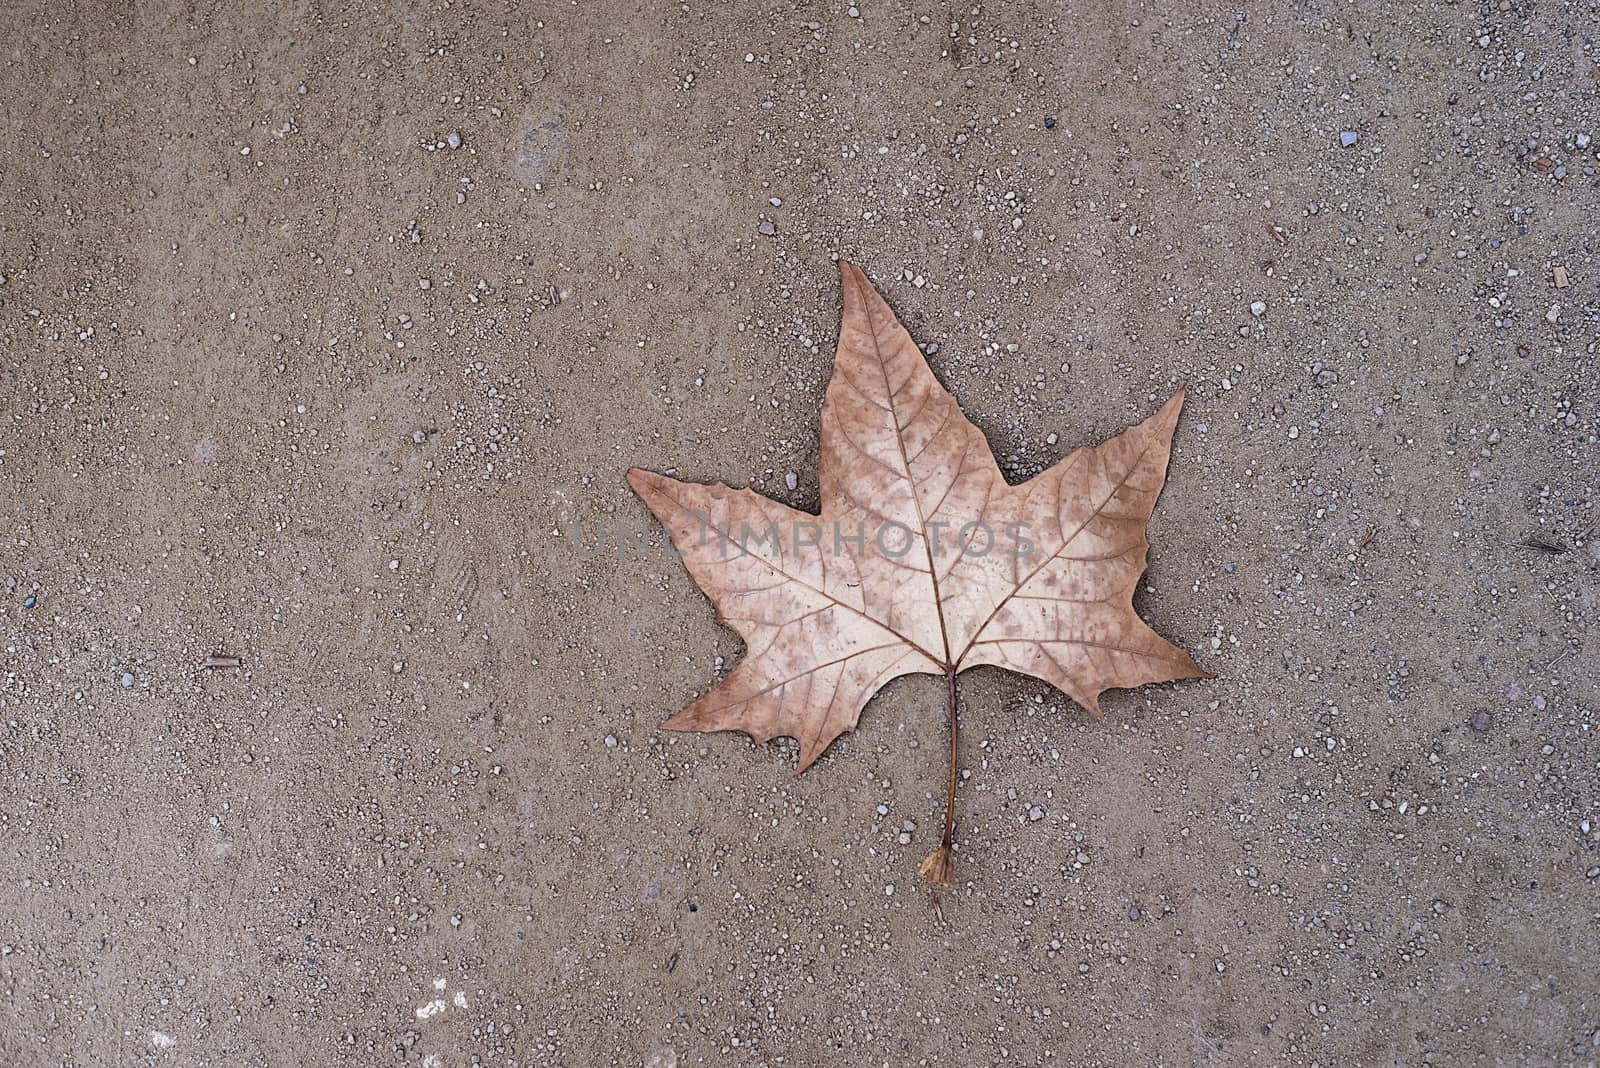 A lonely dry leaf on the ground.